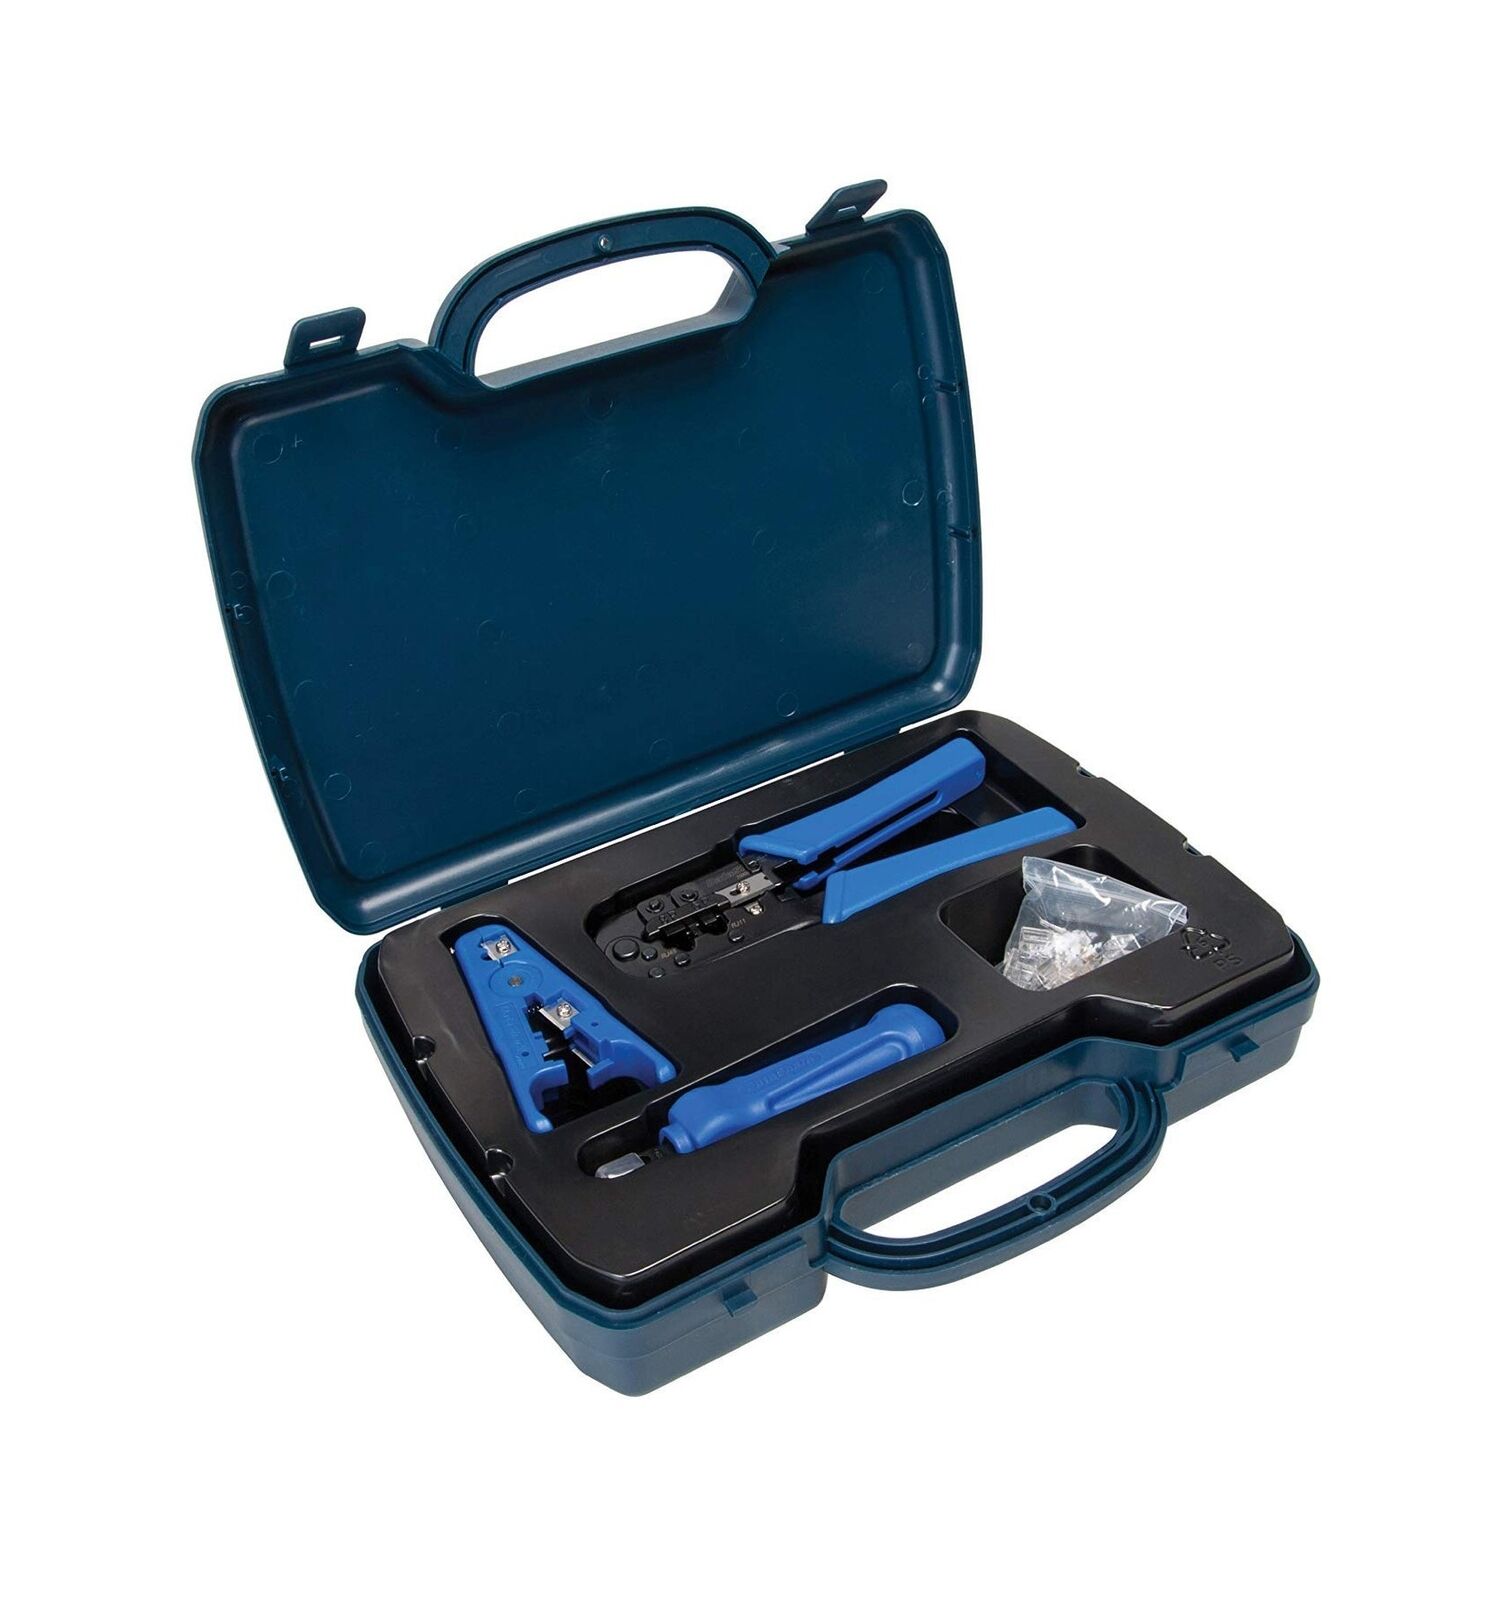 DataShark PA70007 Network Tool Kit | Wire Crimper, Network Cable Stripper, Pu...